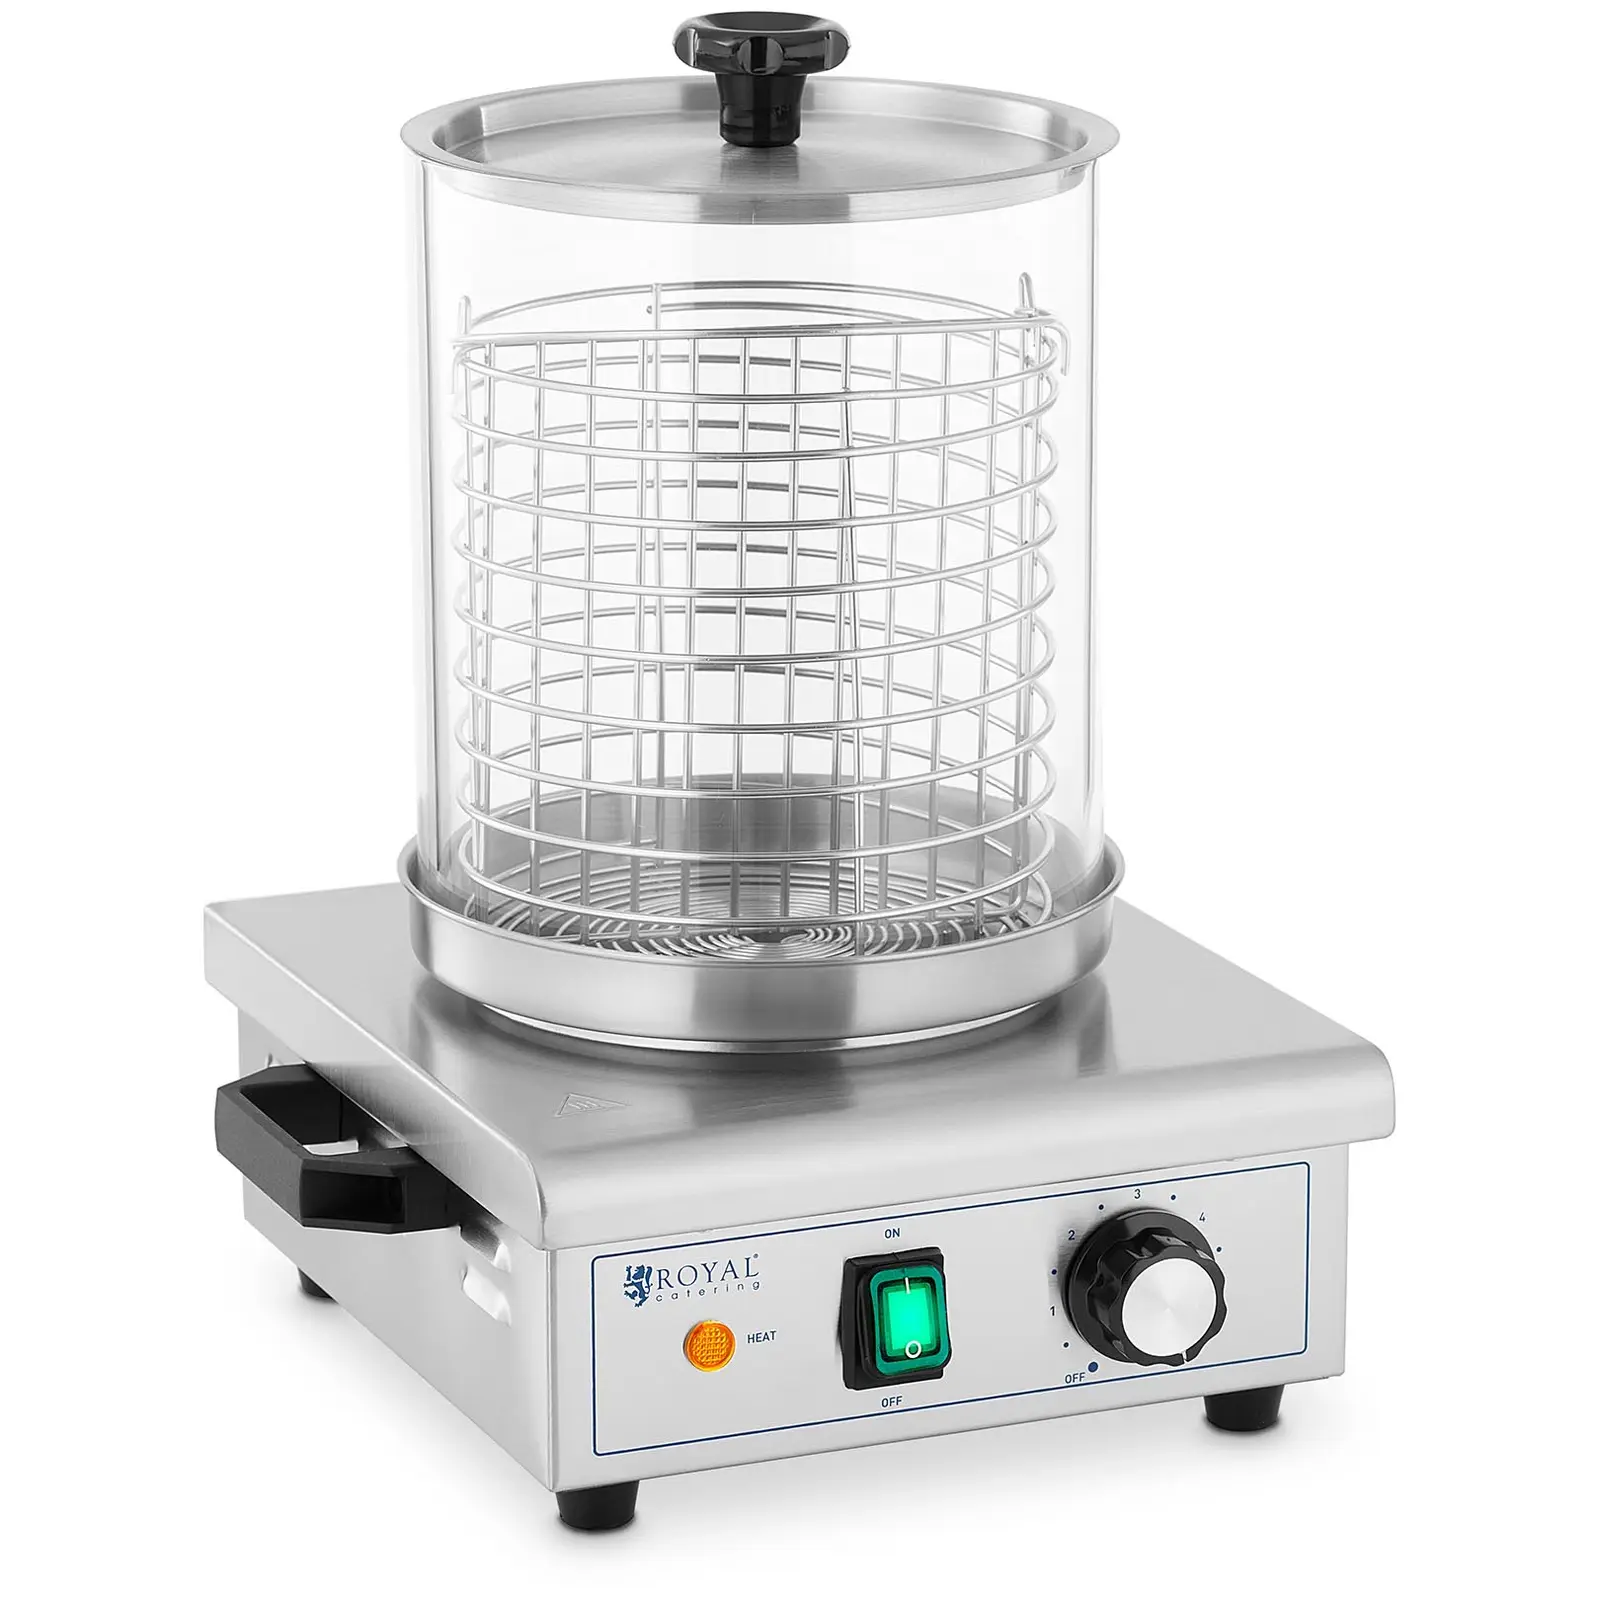 Hot Dog Steamer - 450 W - Royal Catering